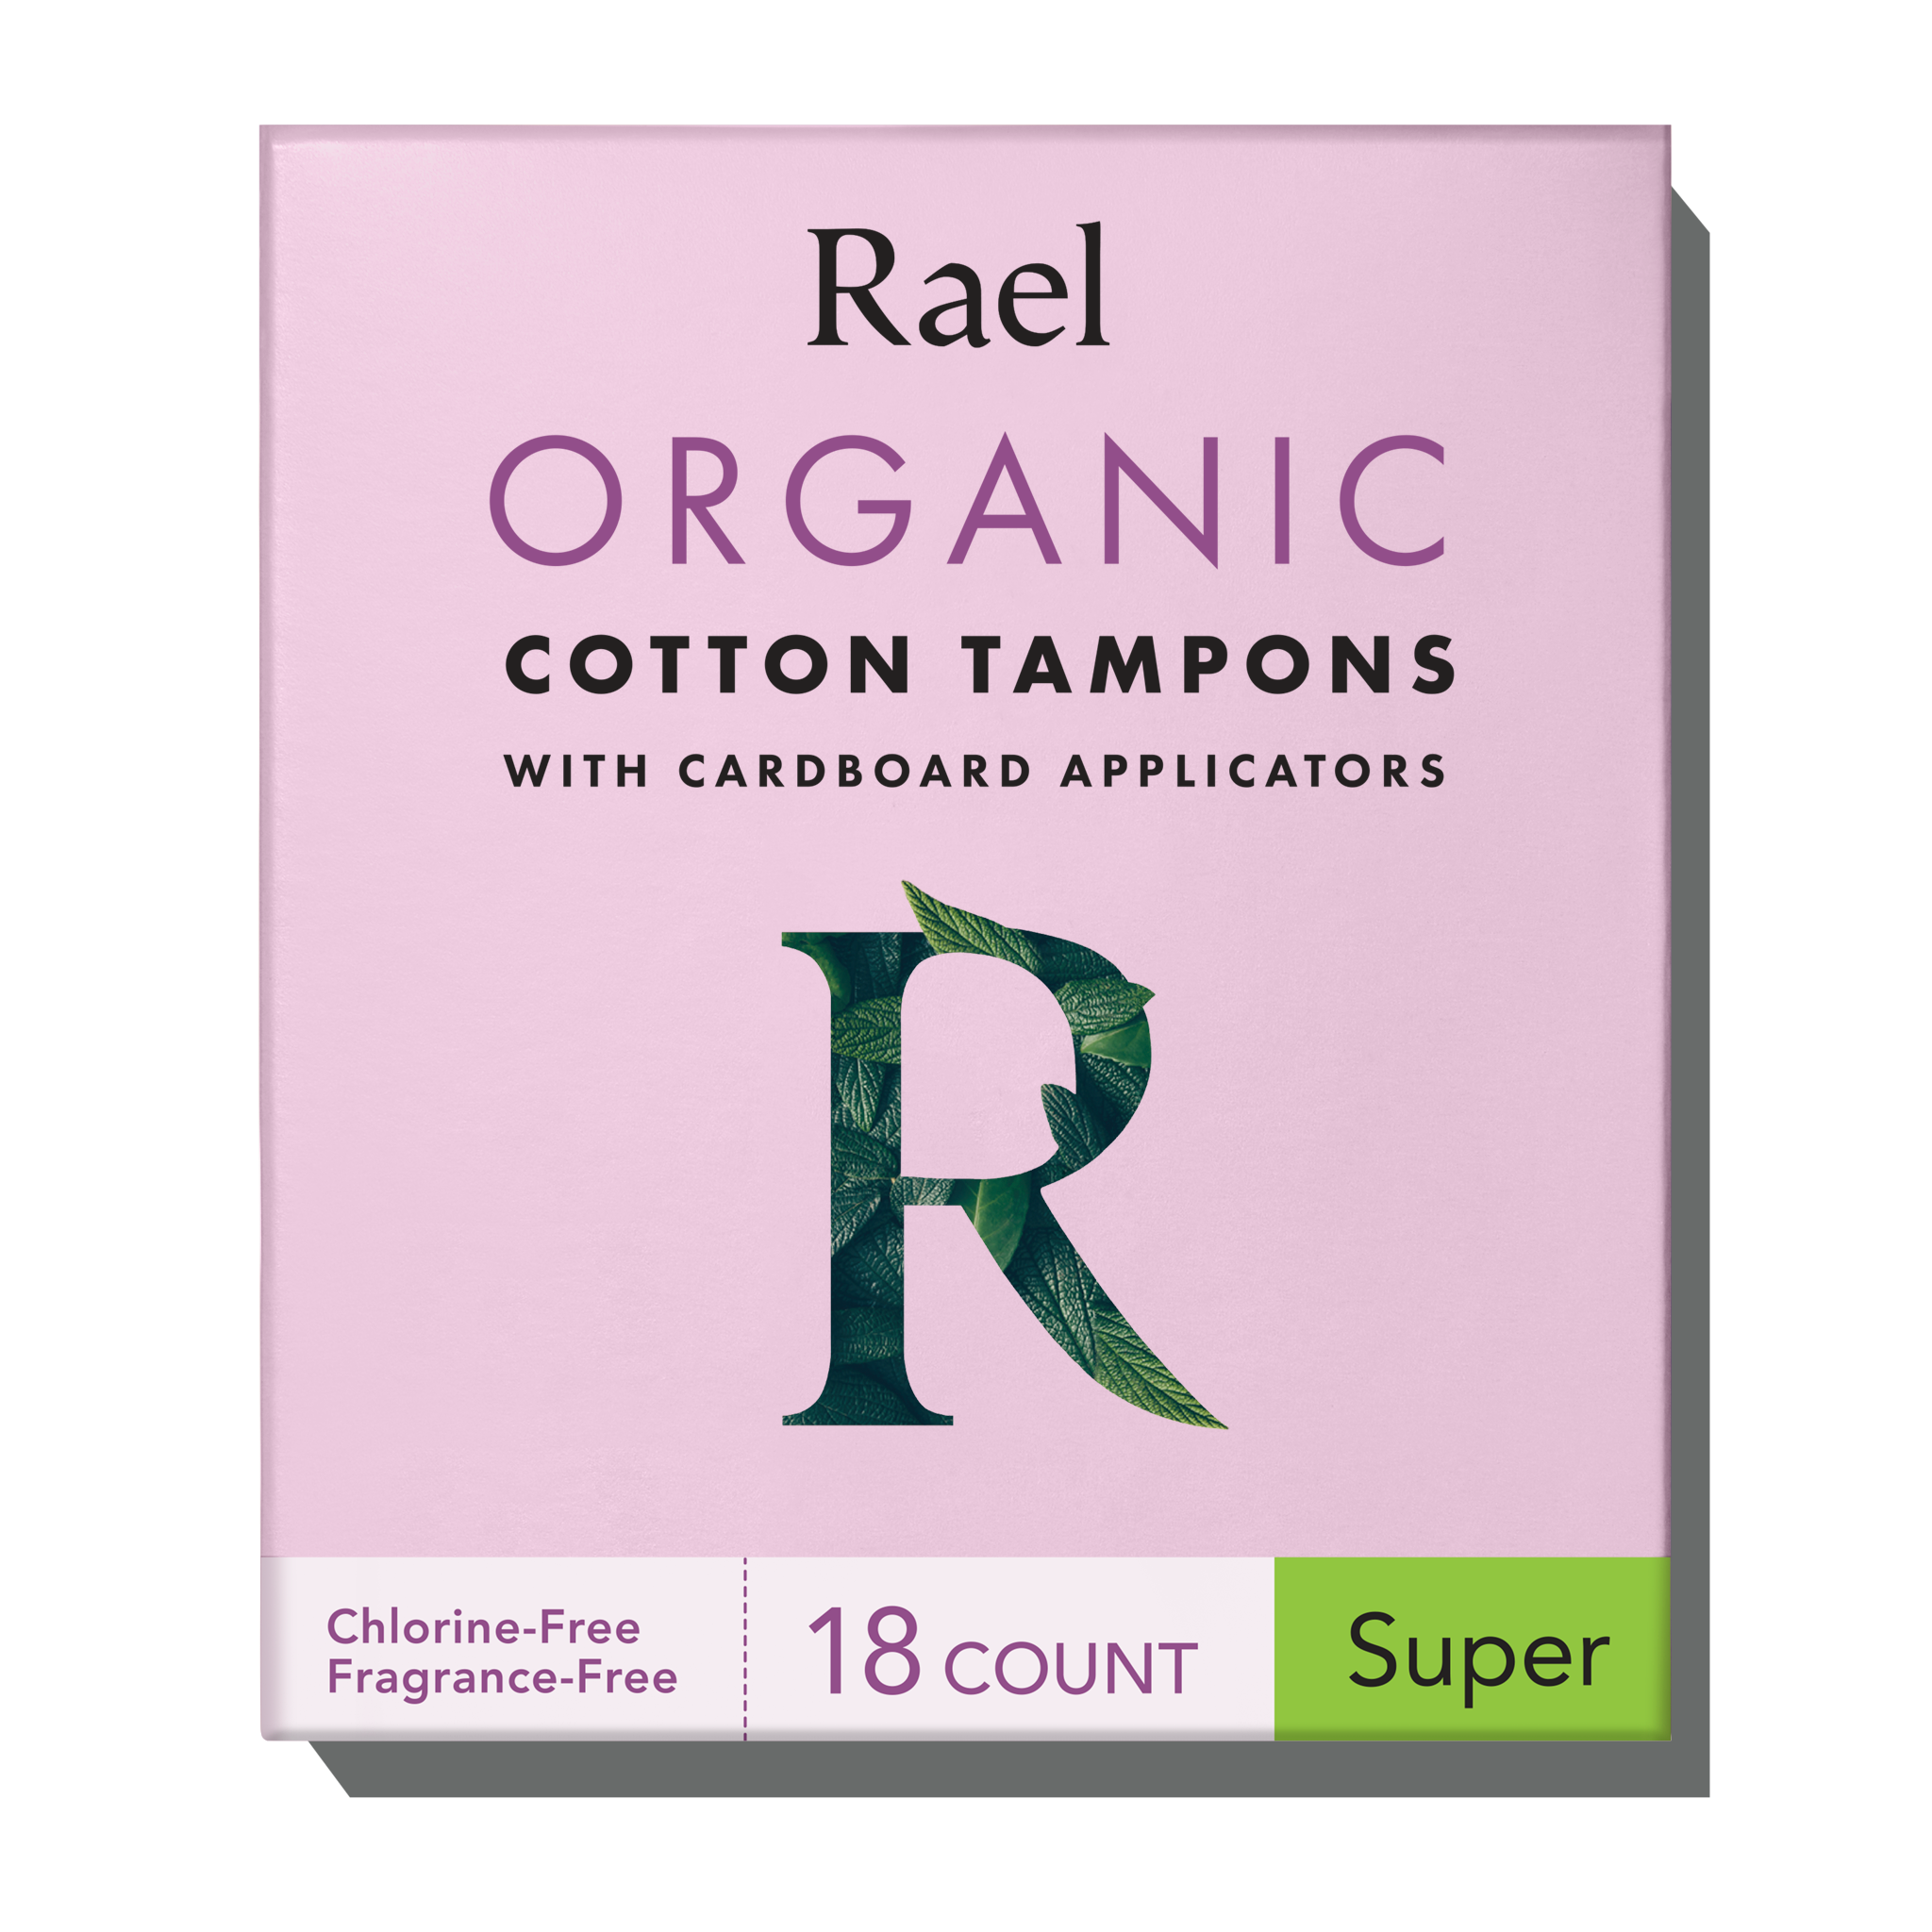 Cardboard Applicator Tampons Made With Organic Cotton